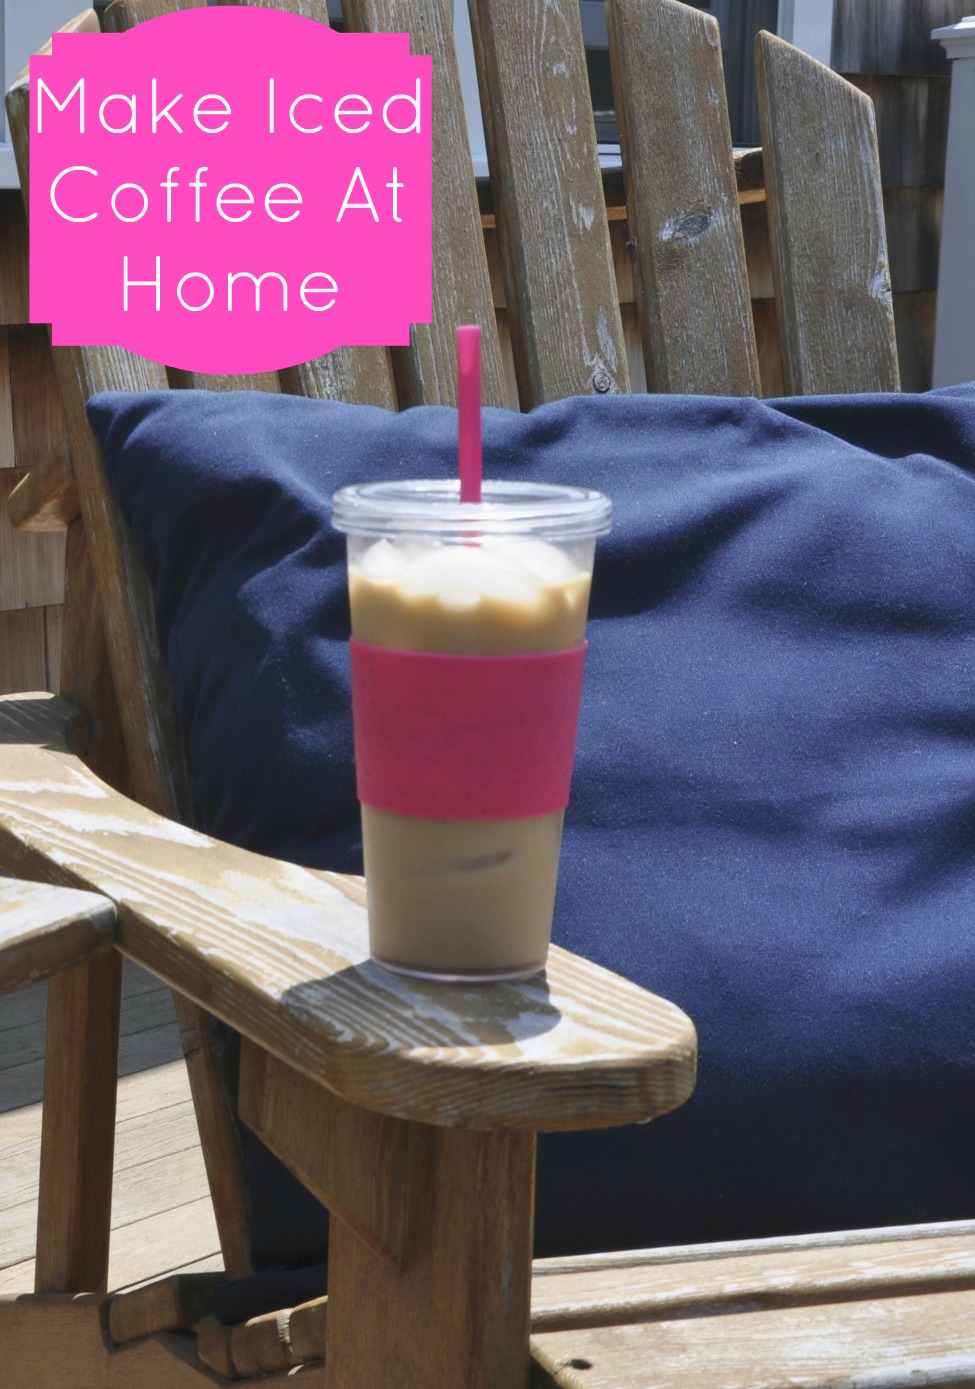 How to Make Iced Coffee at Home in 2 Steps